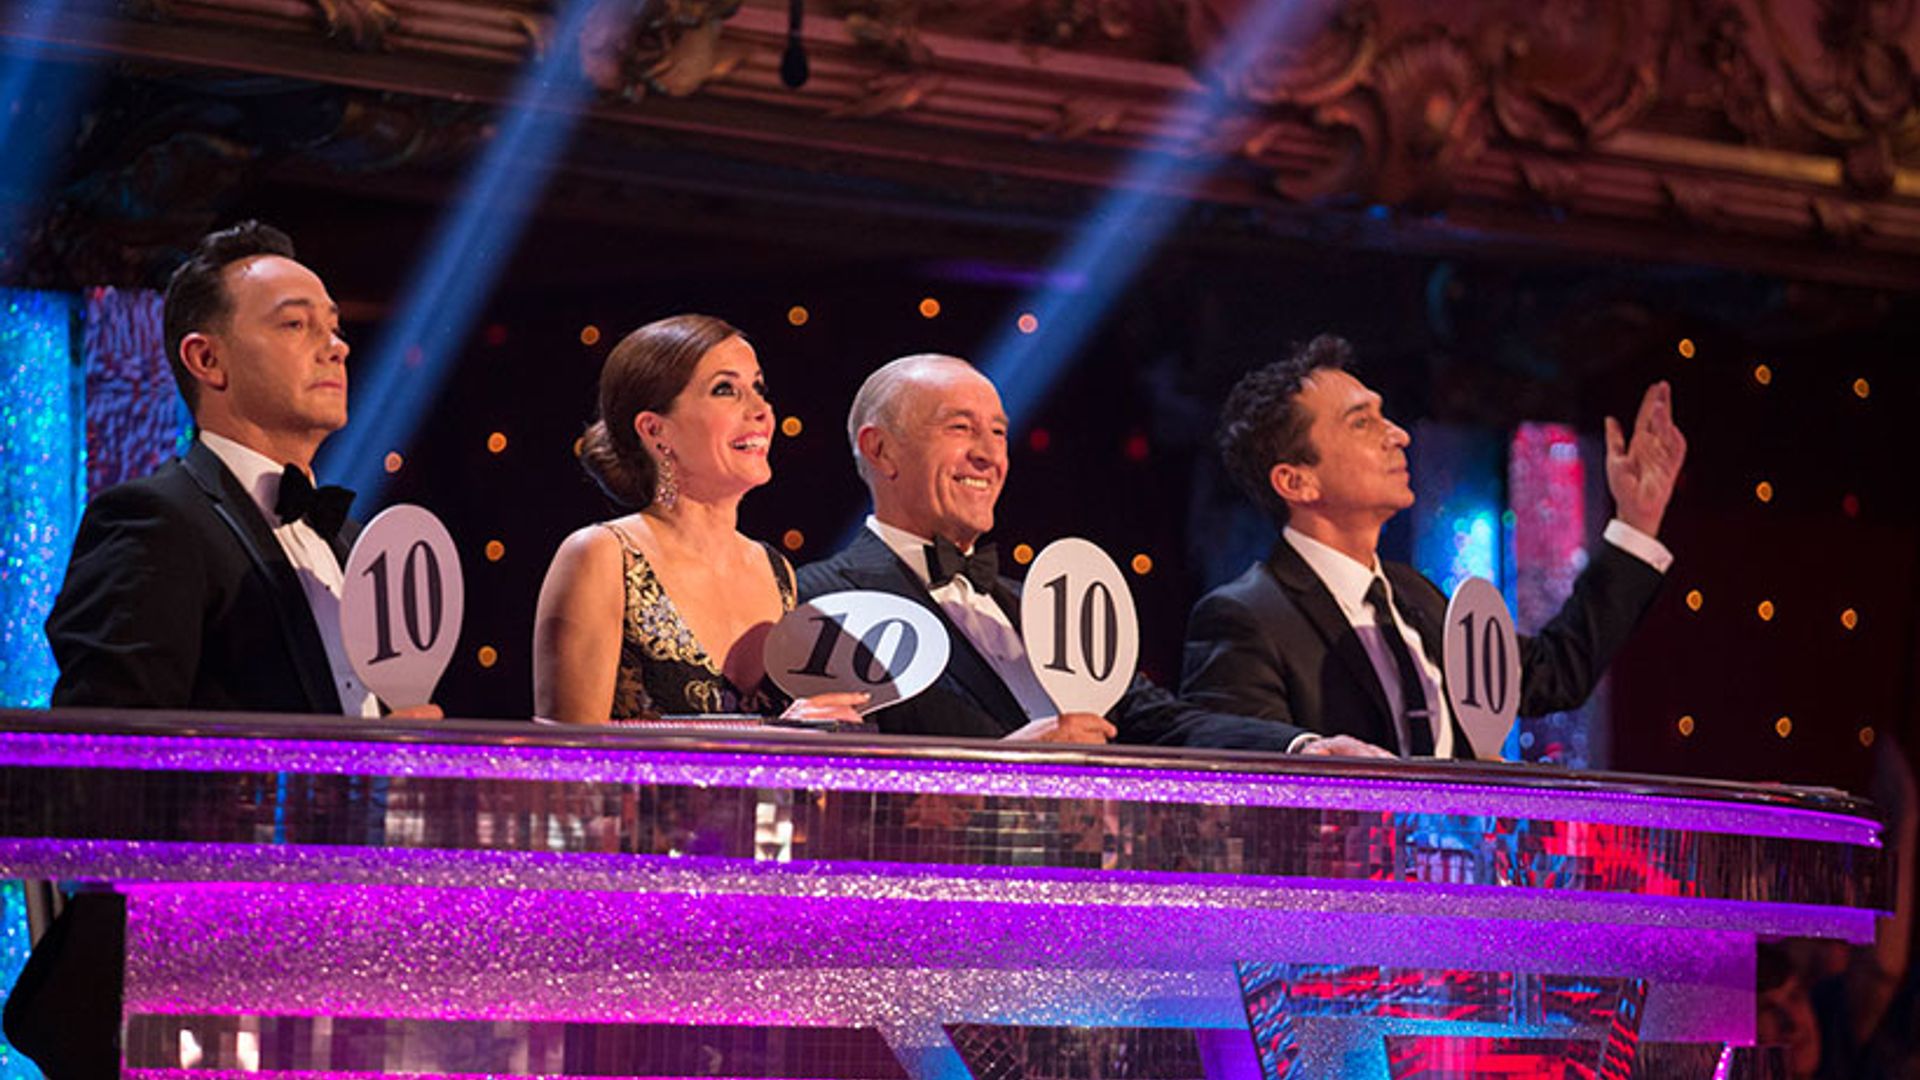 Find out the latest contestant to leave Strictly Come Dancing